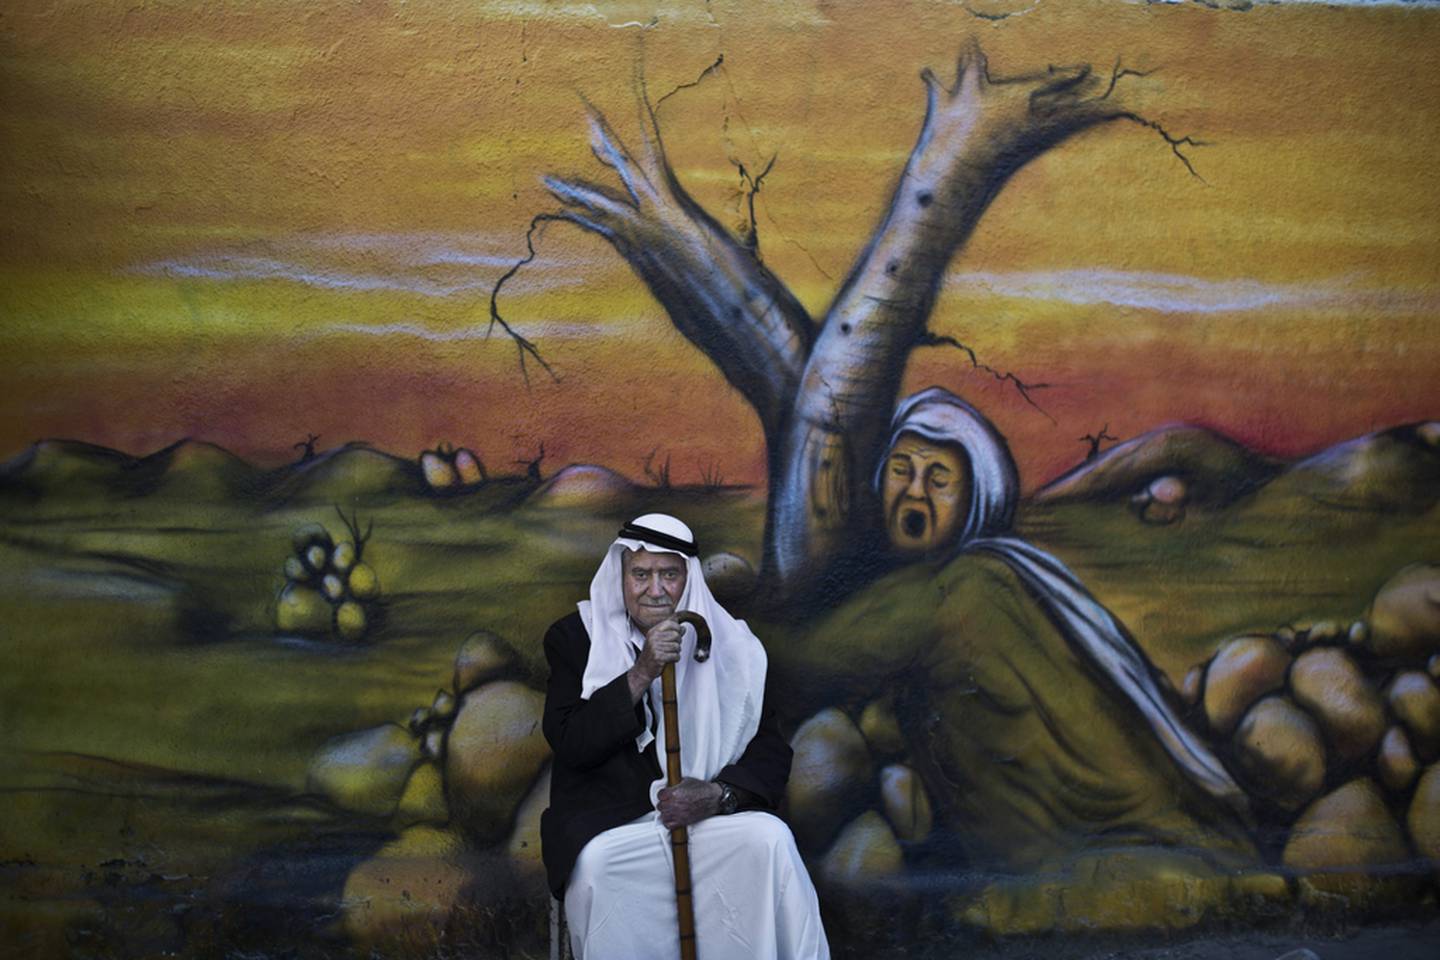 Palestinian refugee Mohammed Emtair, 85, in front of a mural depicting the Israeli-Palestinian conflict, in Kalandia refugee camp, between Jerusalem and the West Bank city of Ramallah. 